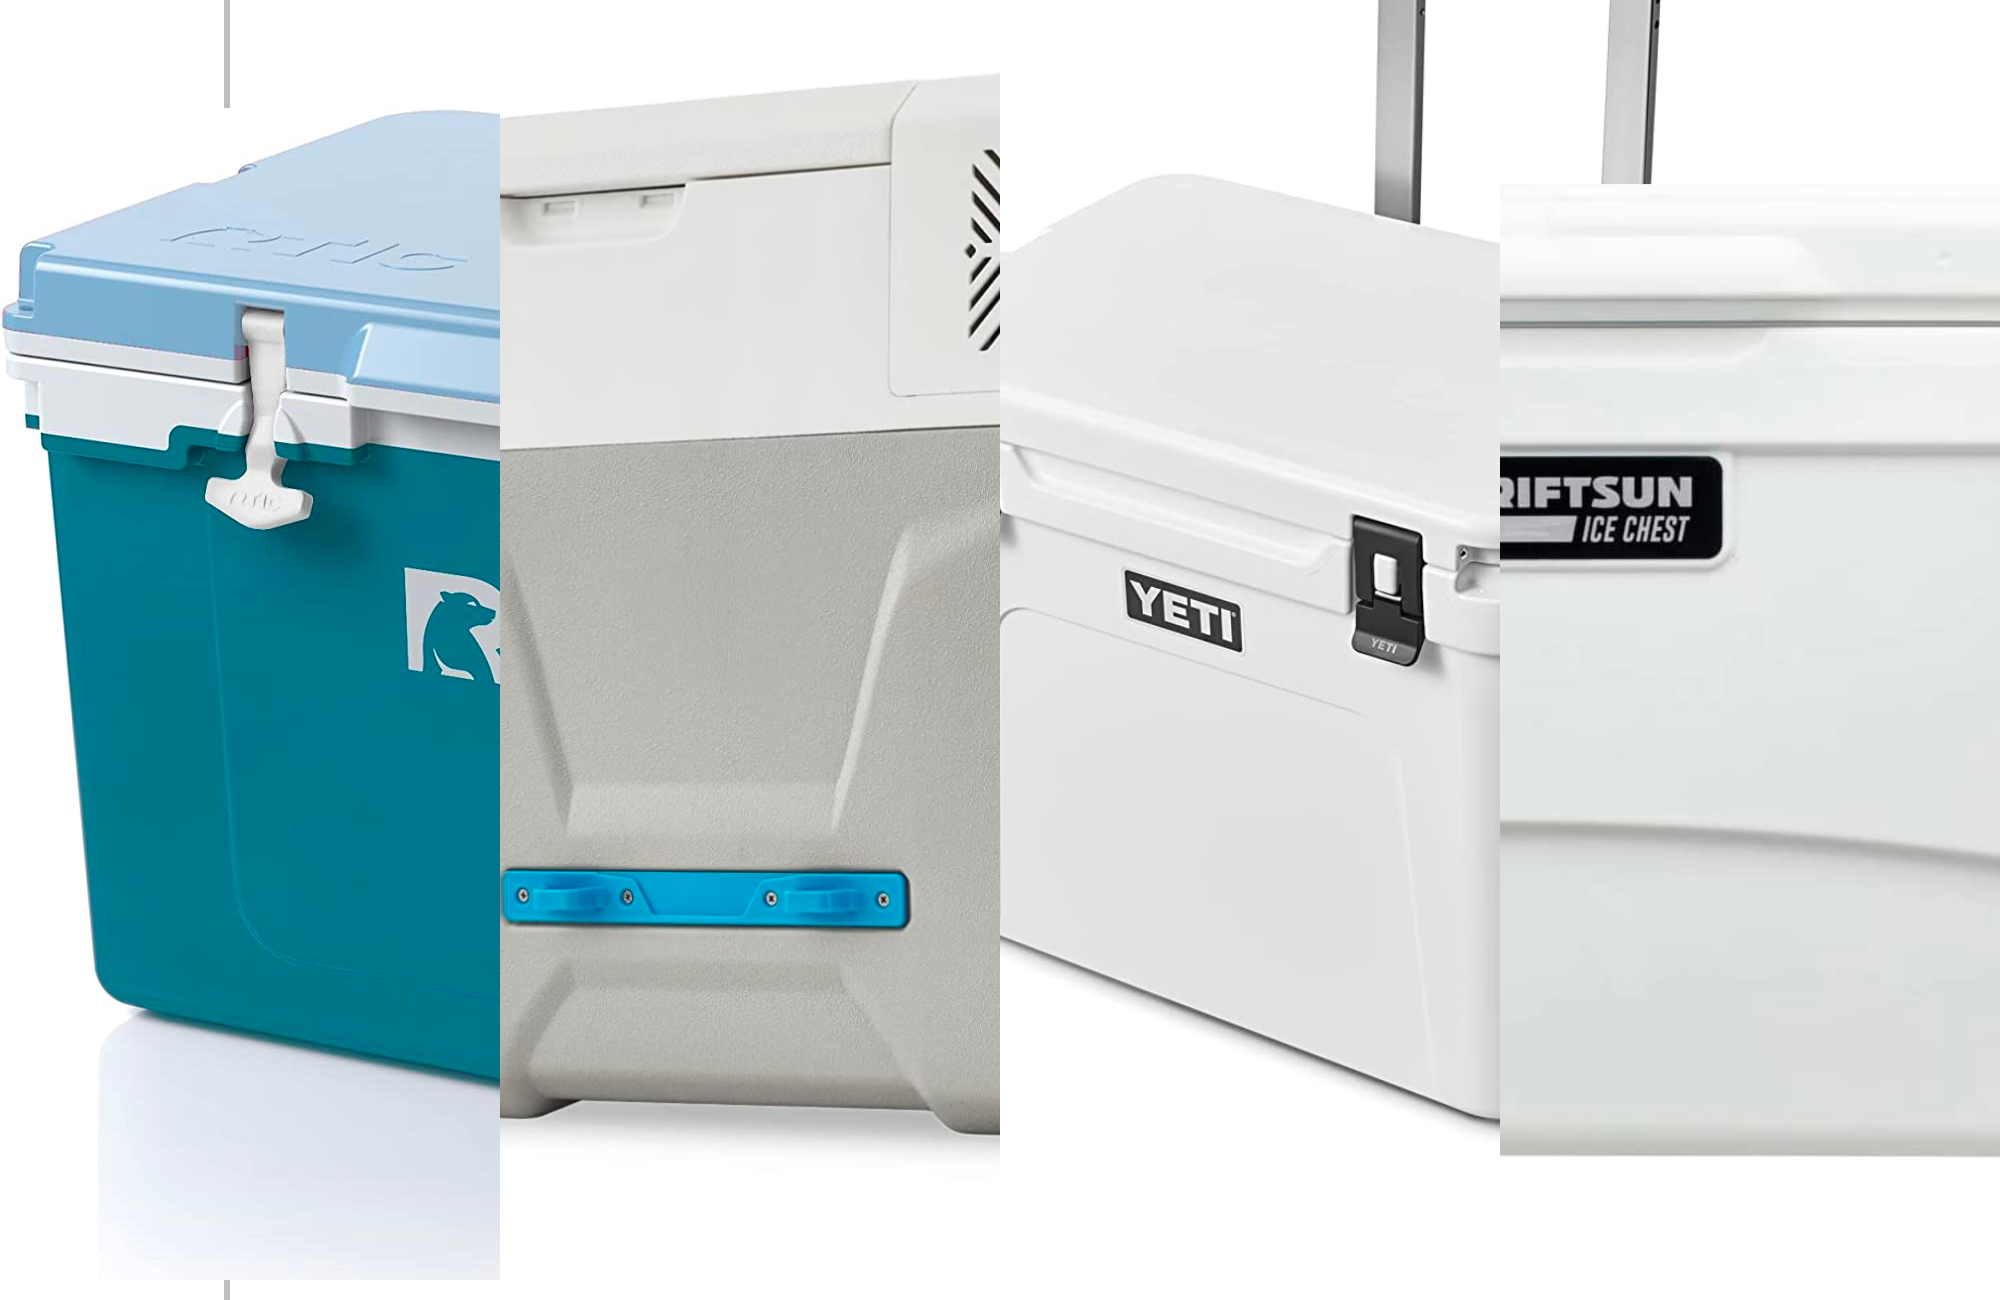 The best coolers for camping in 2023